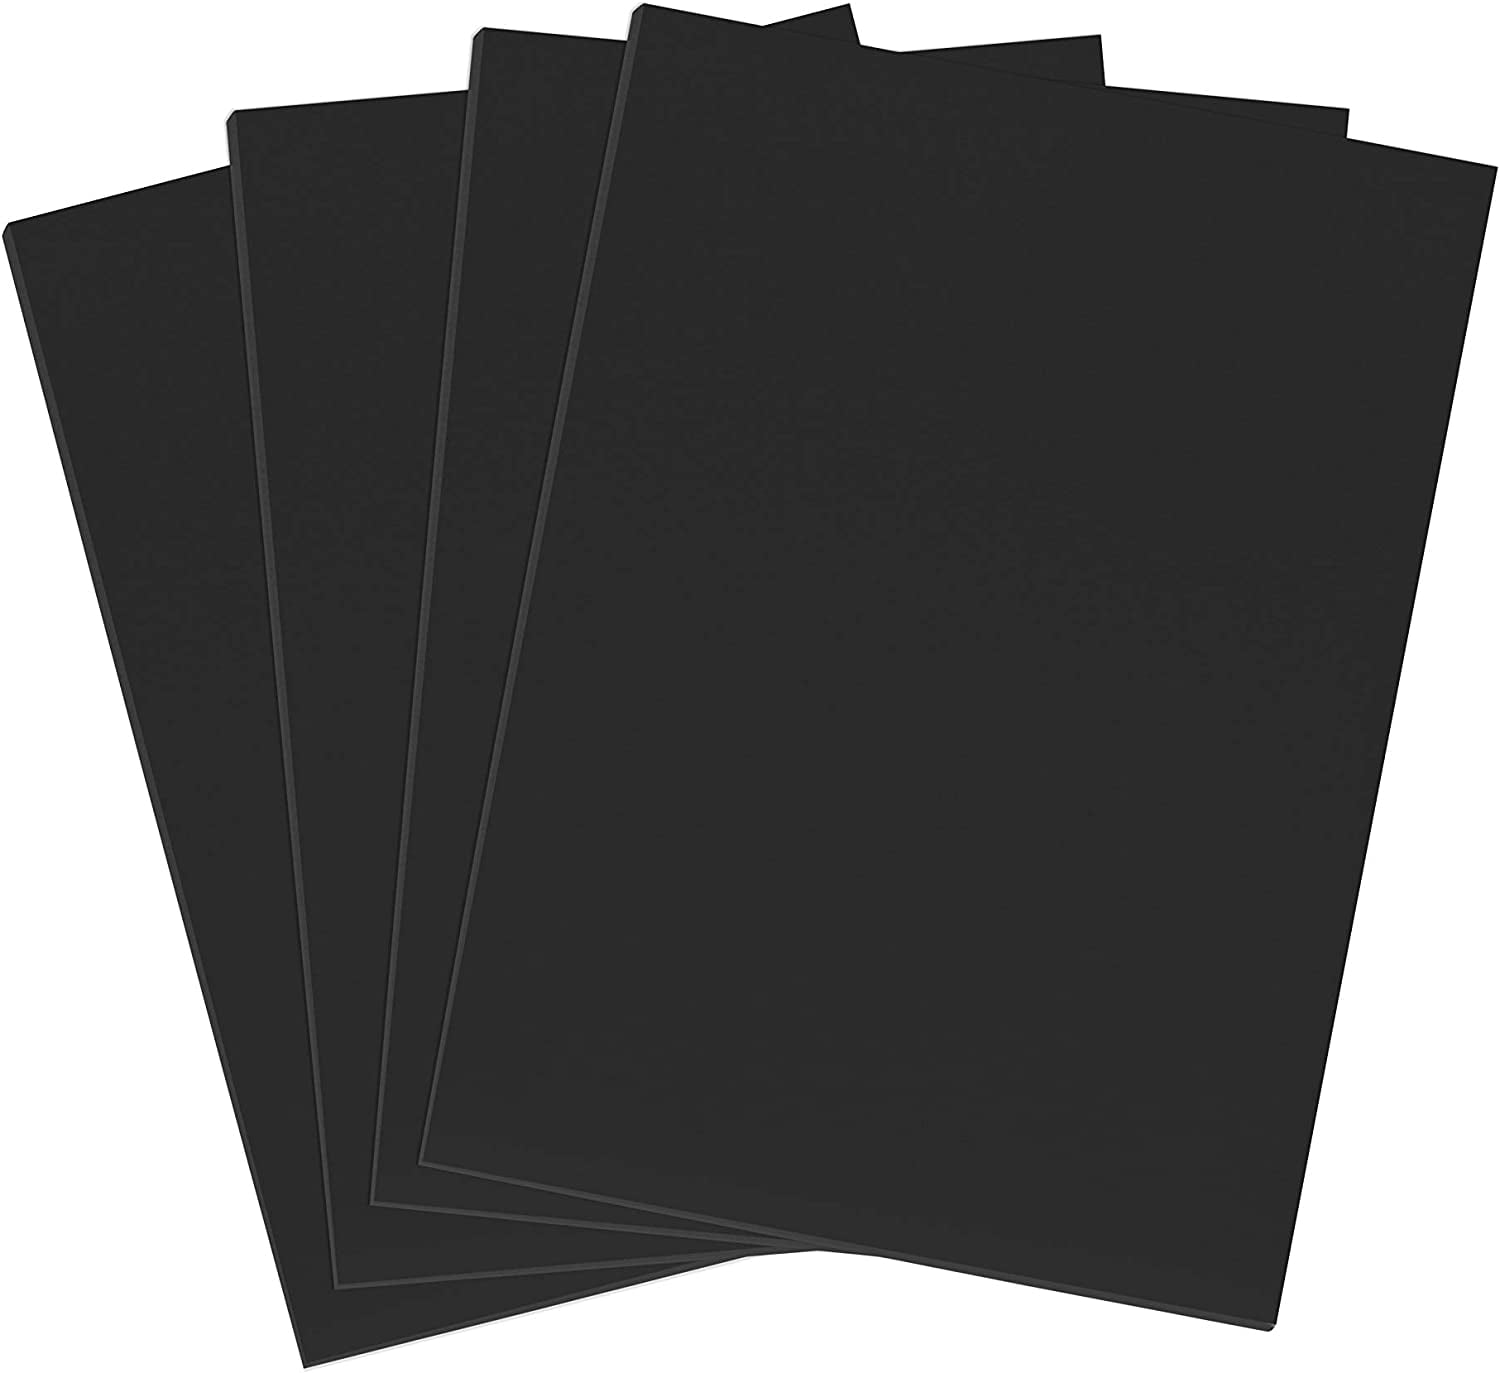 Houseables Foam Sheets, Art and Craft Supplies, Black, 6mm Thick, 9 x 12 inch, 1